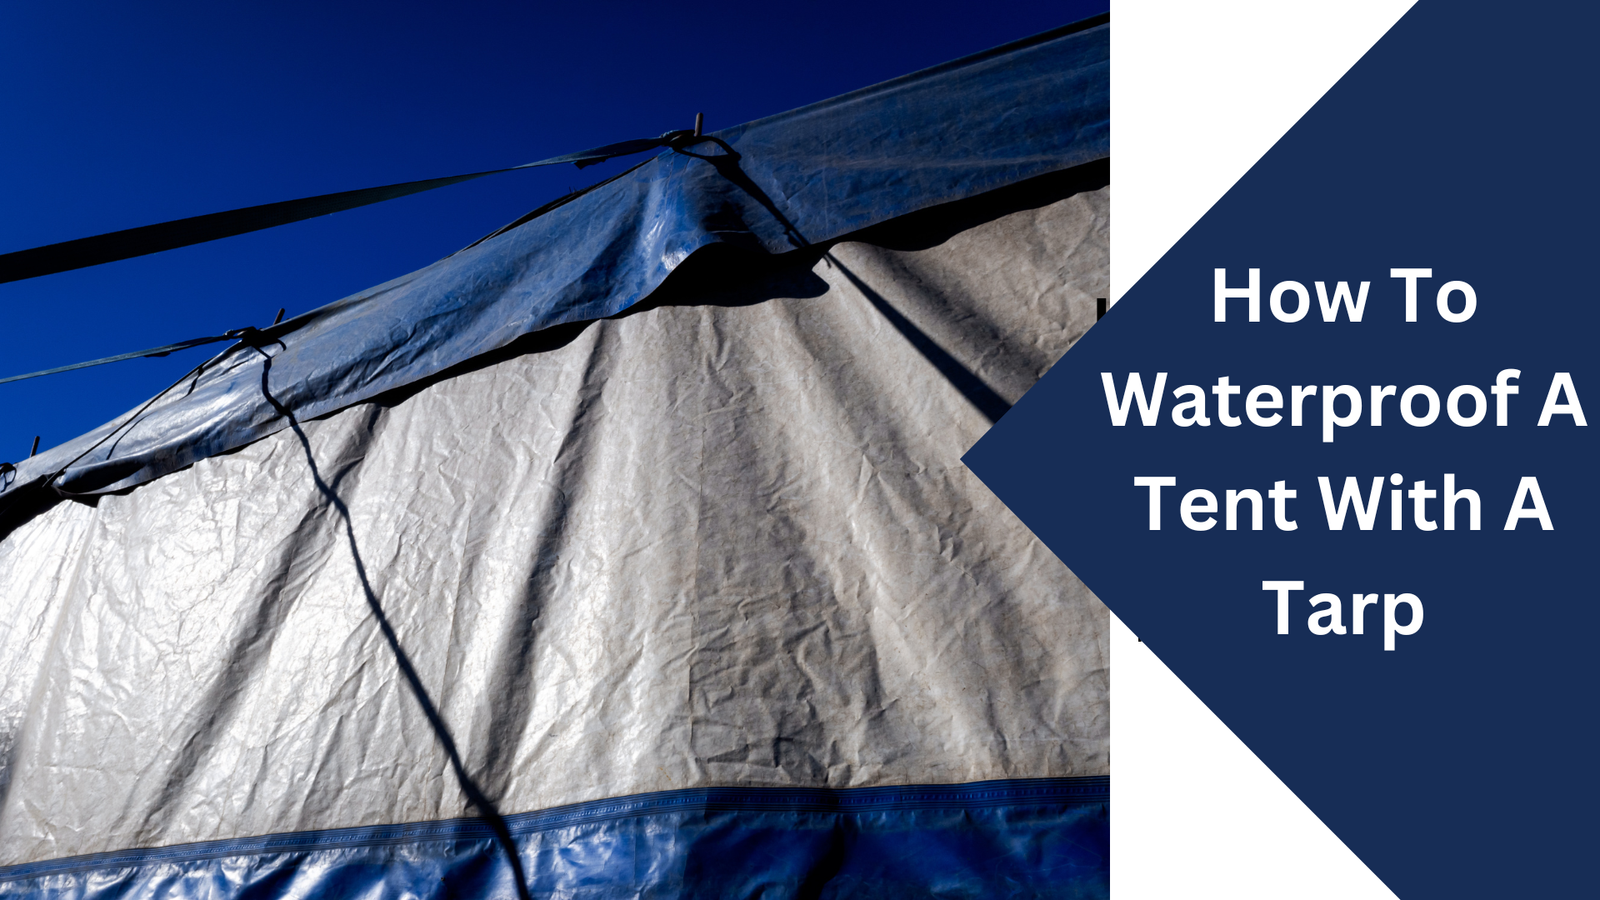 How to Waterproof a Tent with a Tarp